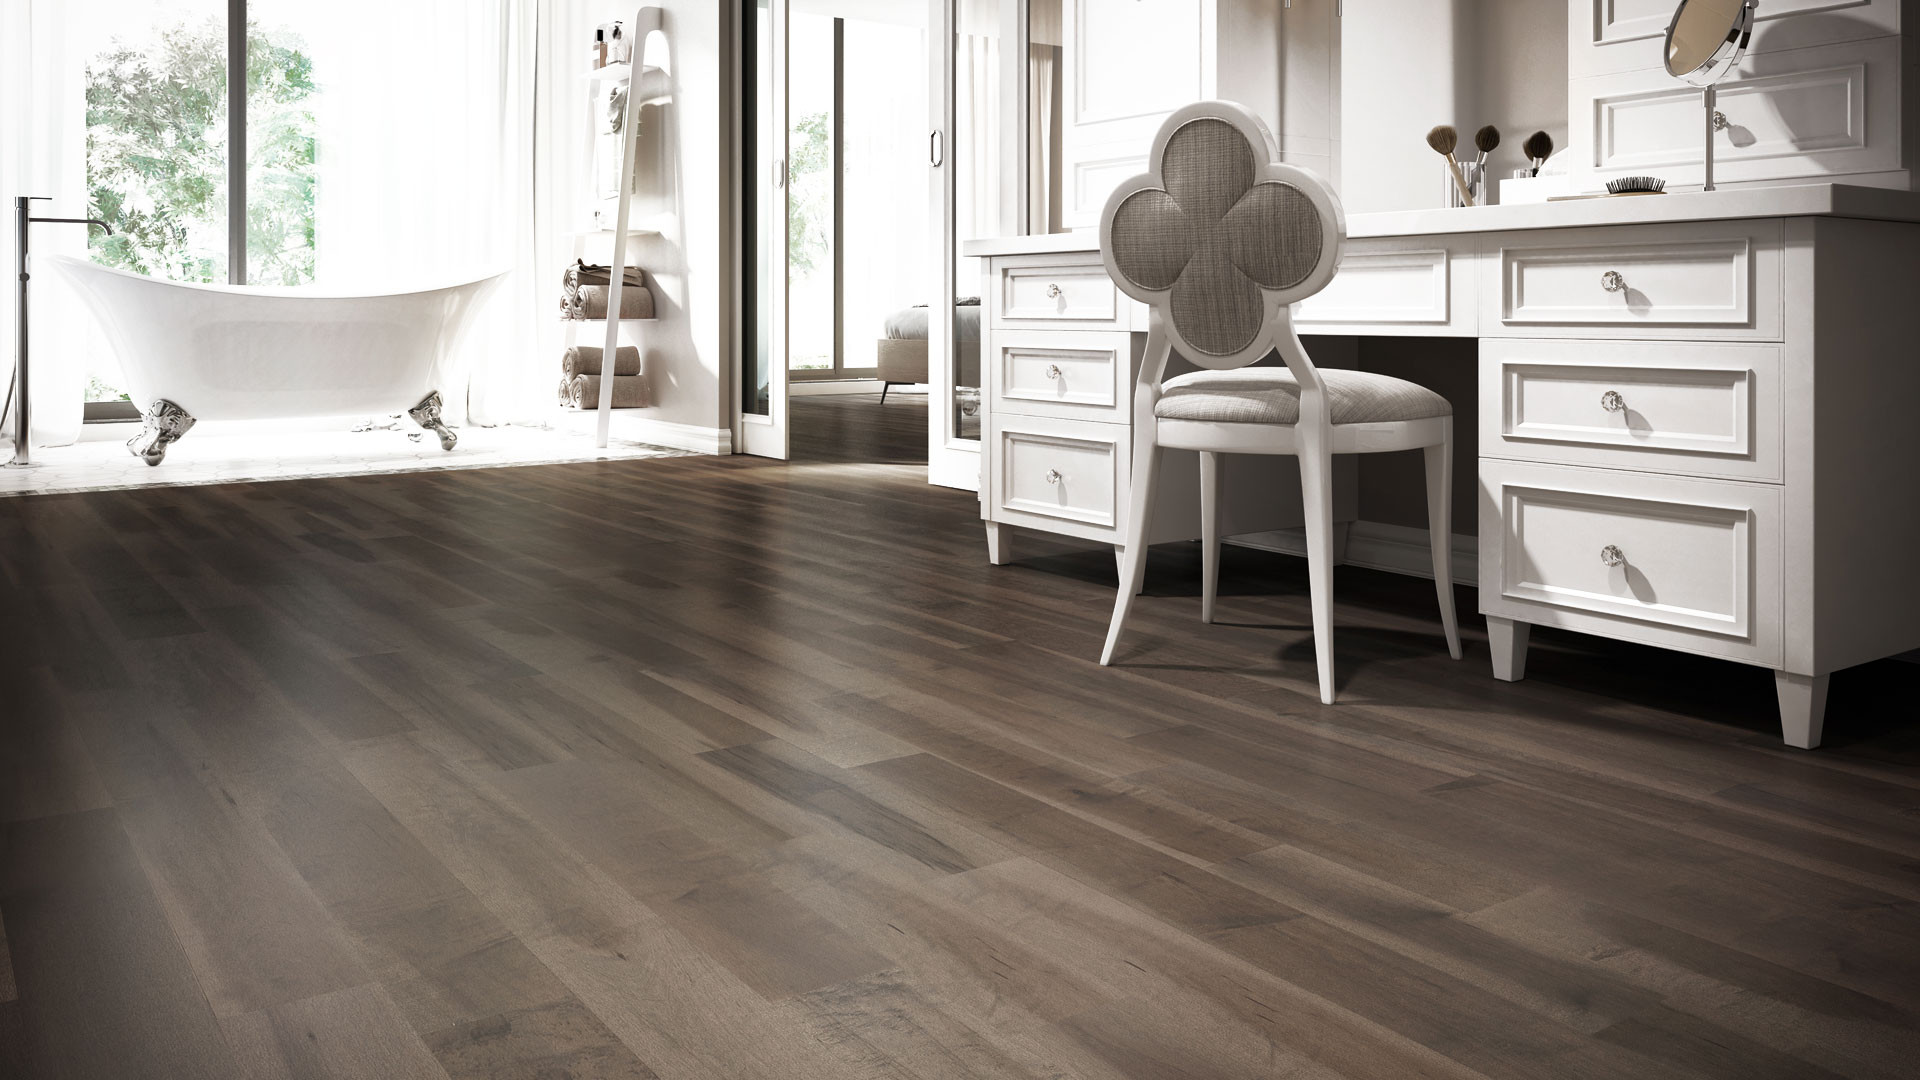 23 Famous Hardwood Flooring Floor and Decor 2024 free download hardwood flooring floor and decor of 4 latest hardwood flooring trends lauzon flooring intended for learn more about our pure genius by reading our blog post the smartest hardwood flooring w